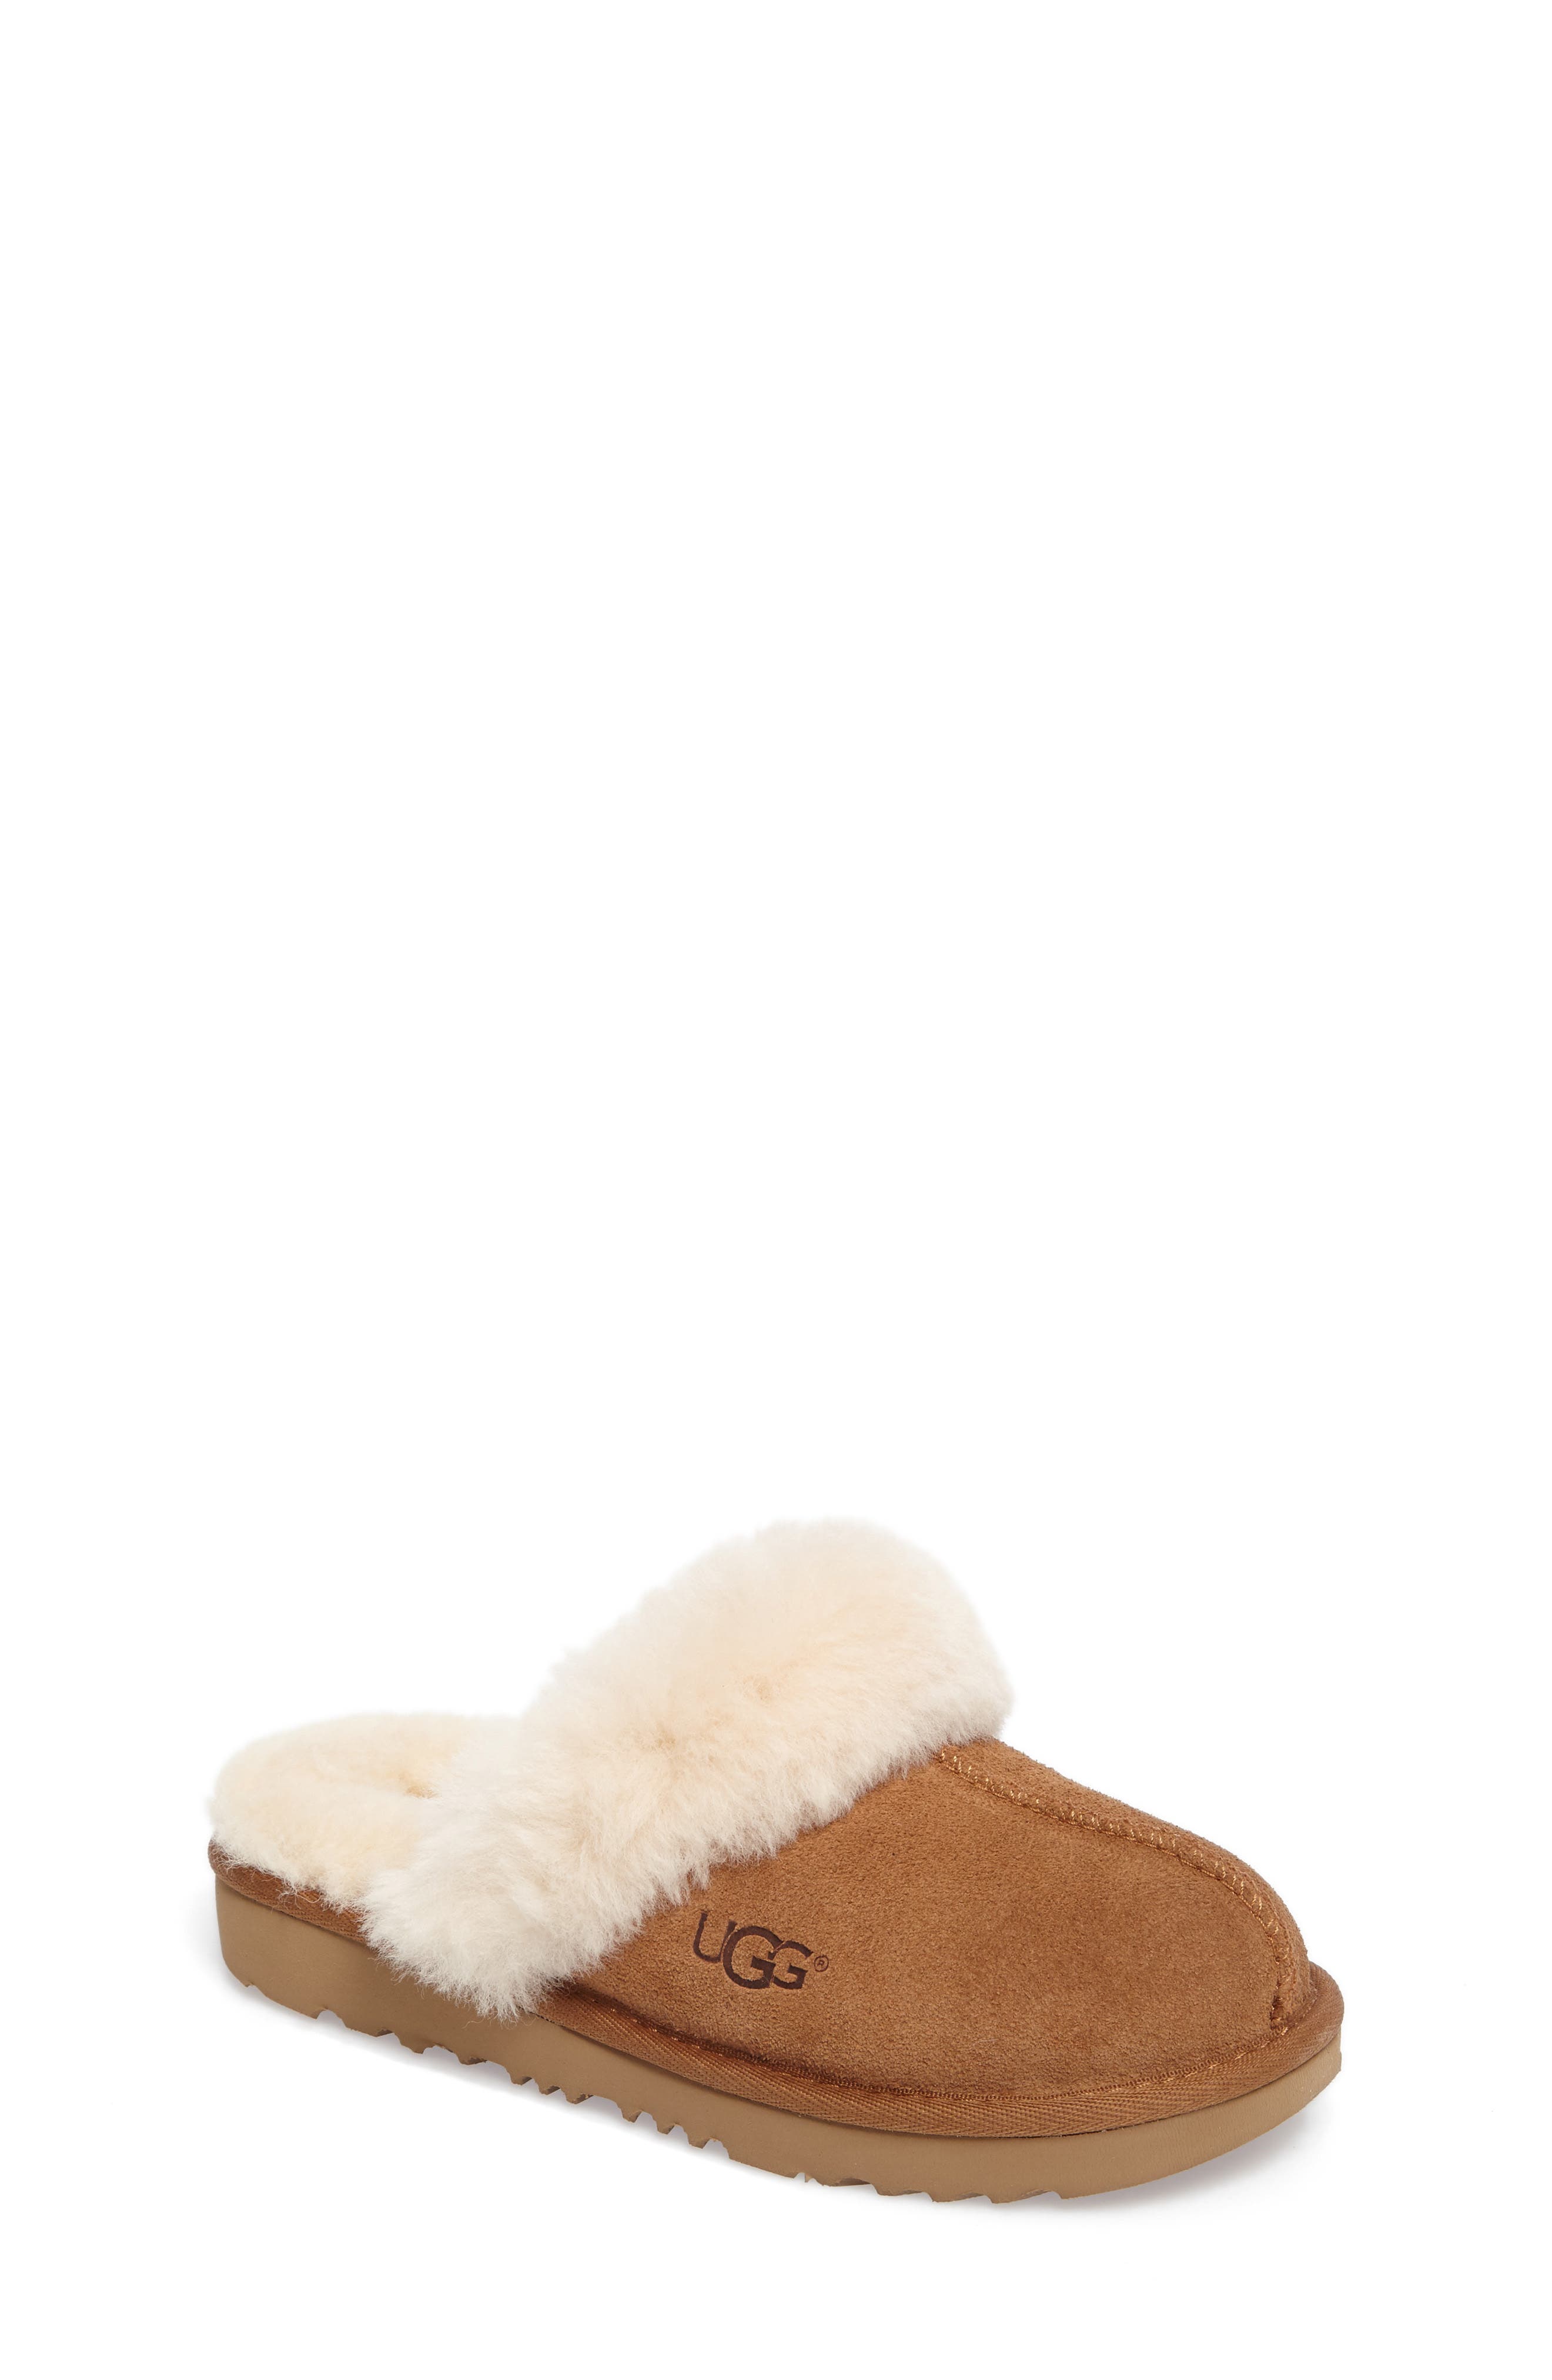 uggs for toddlers size 8